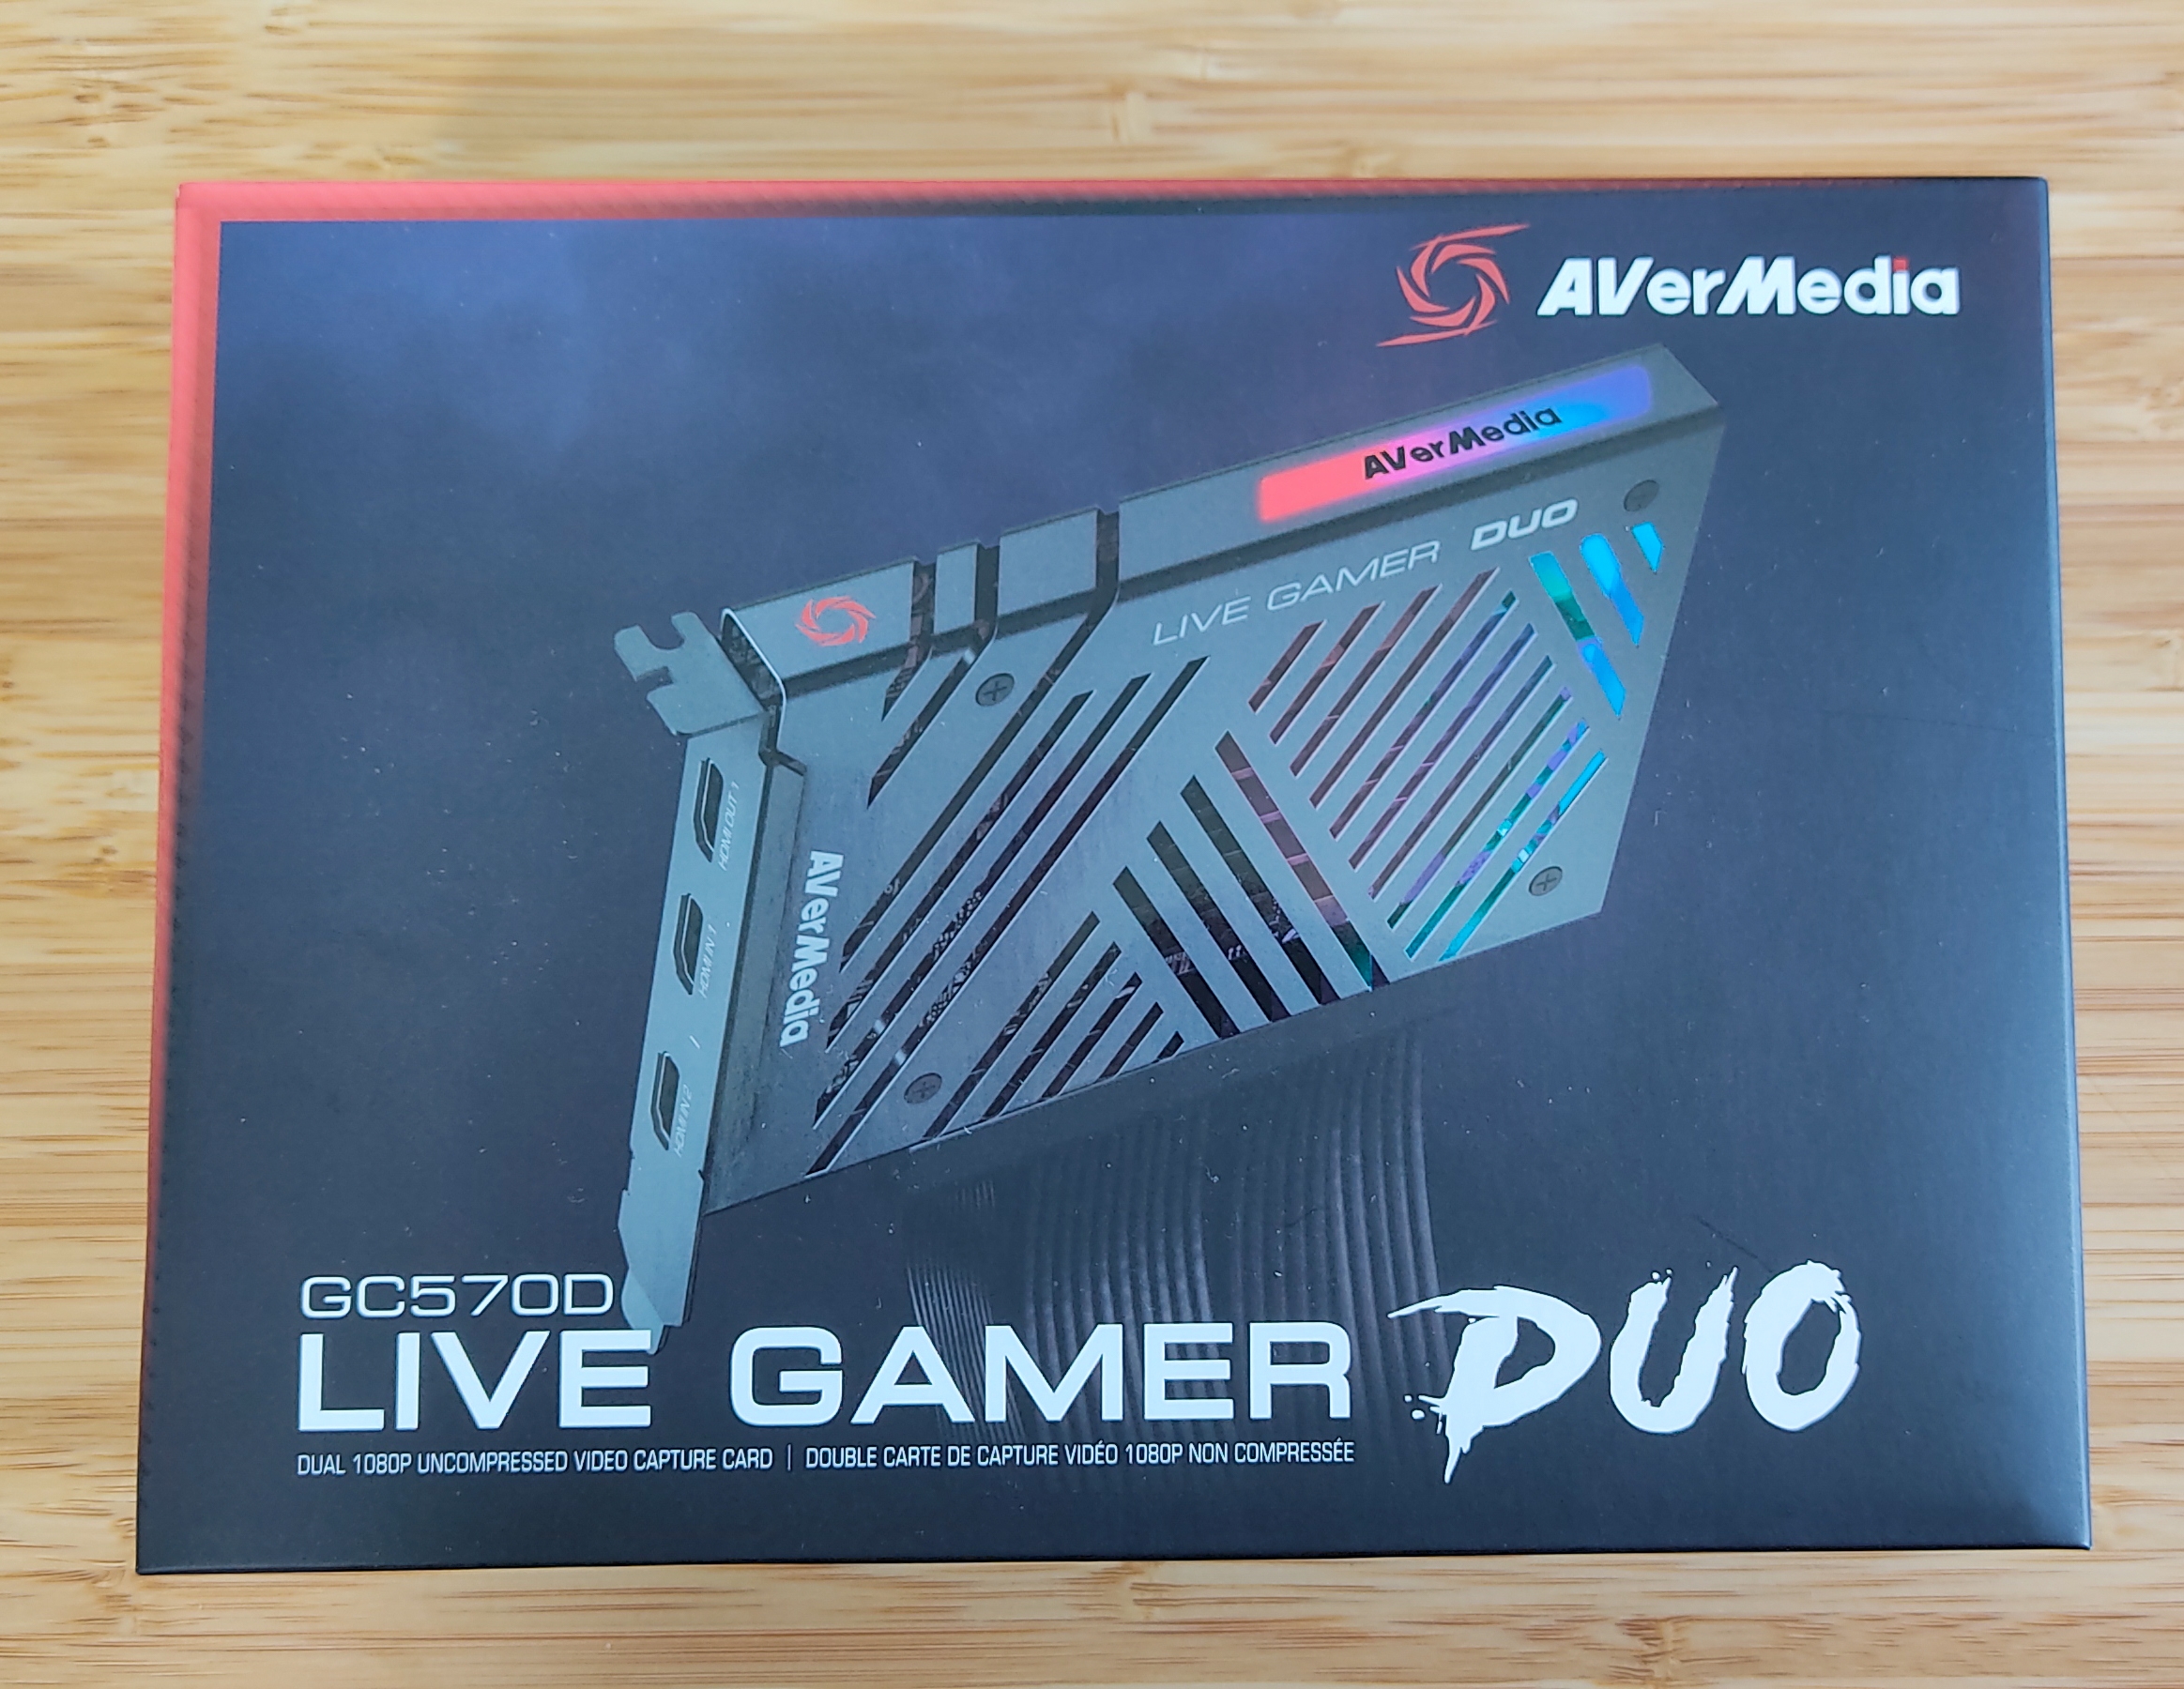 Live Gamer DUO